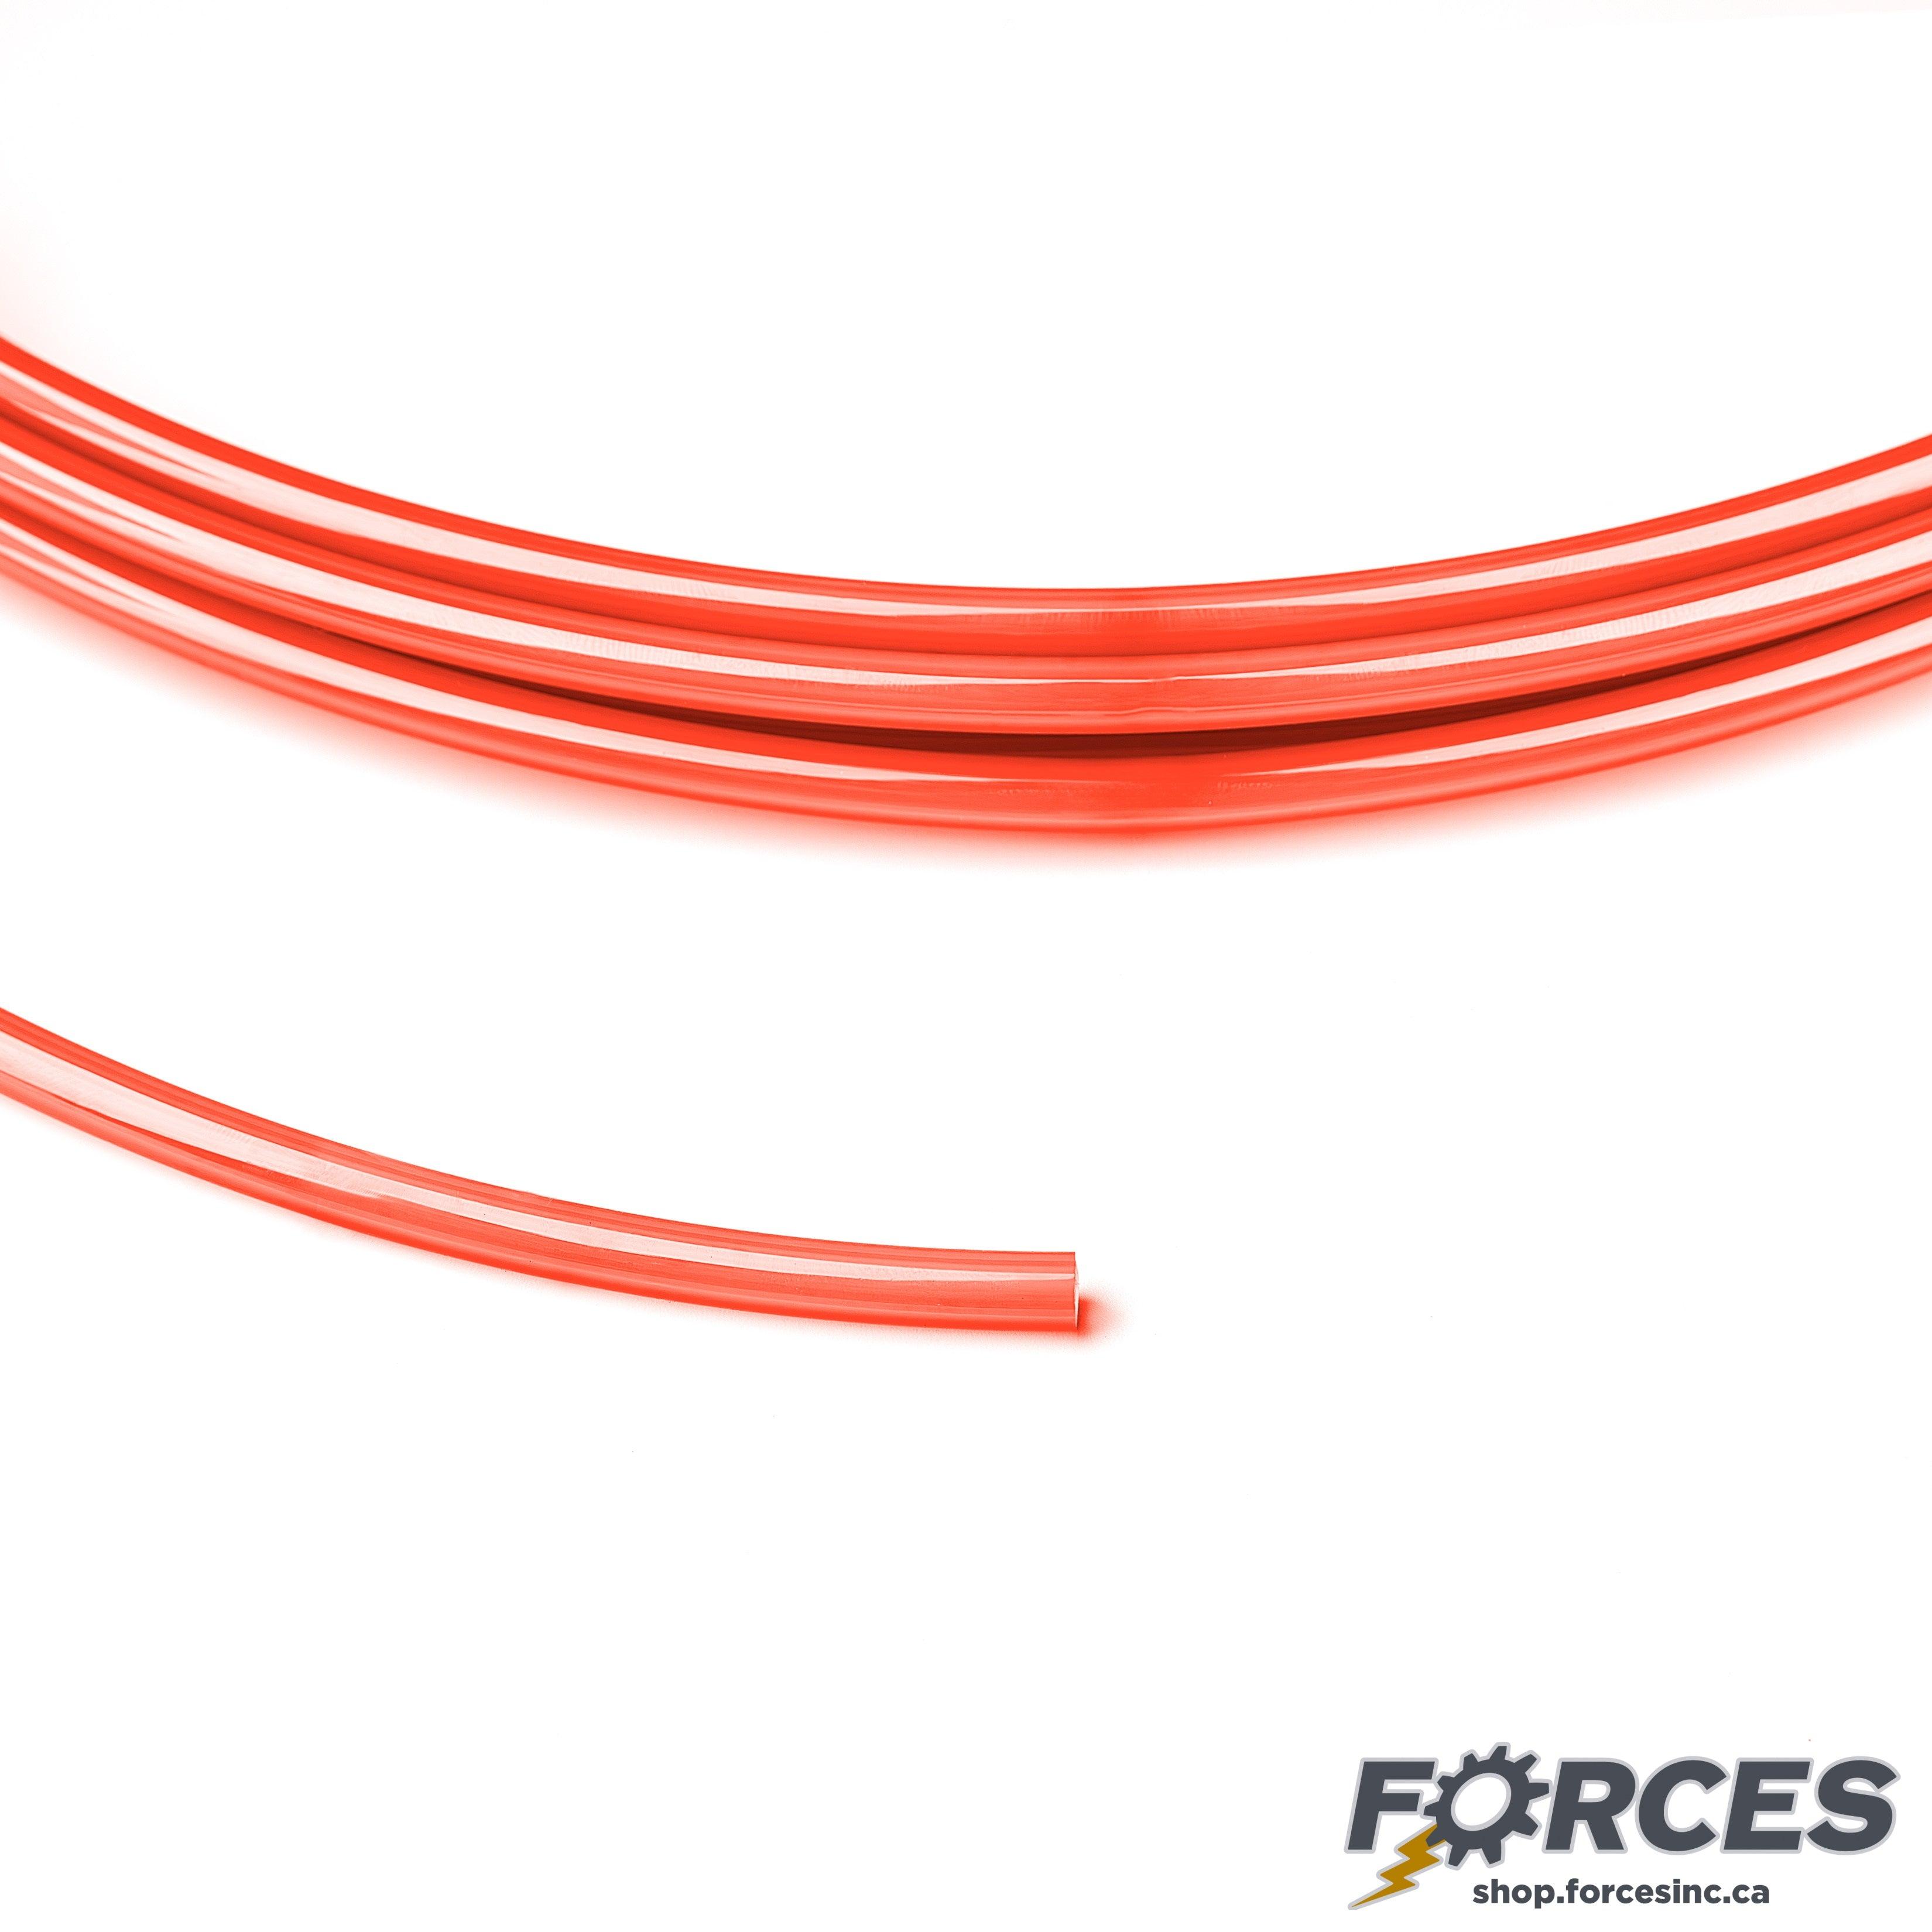 Pneumatic Air Tubing 1/2" x 8.5mm Red Polyurethane - 330ft - Forces Inc